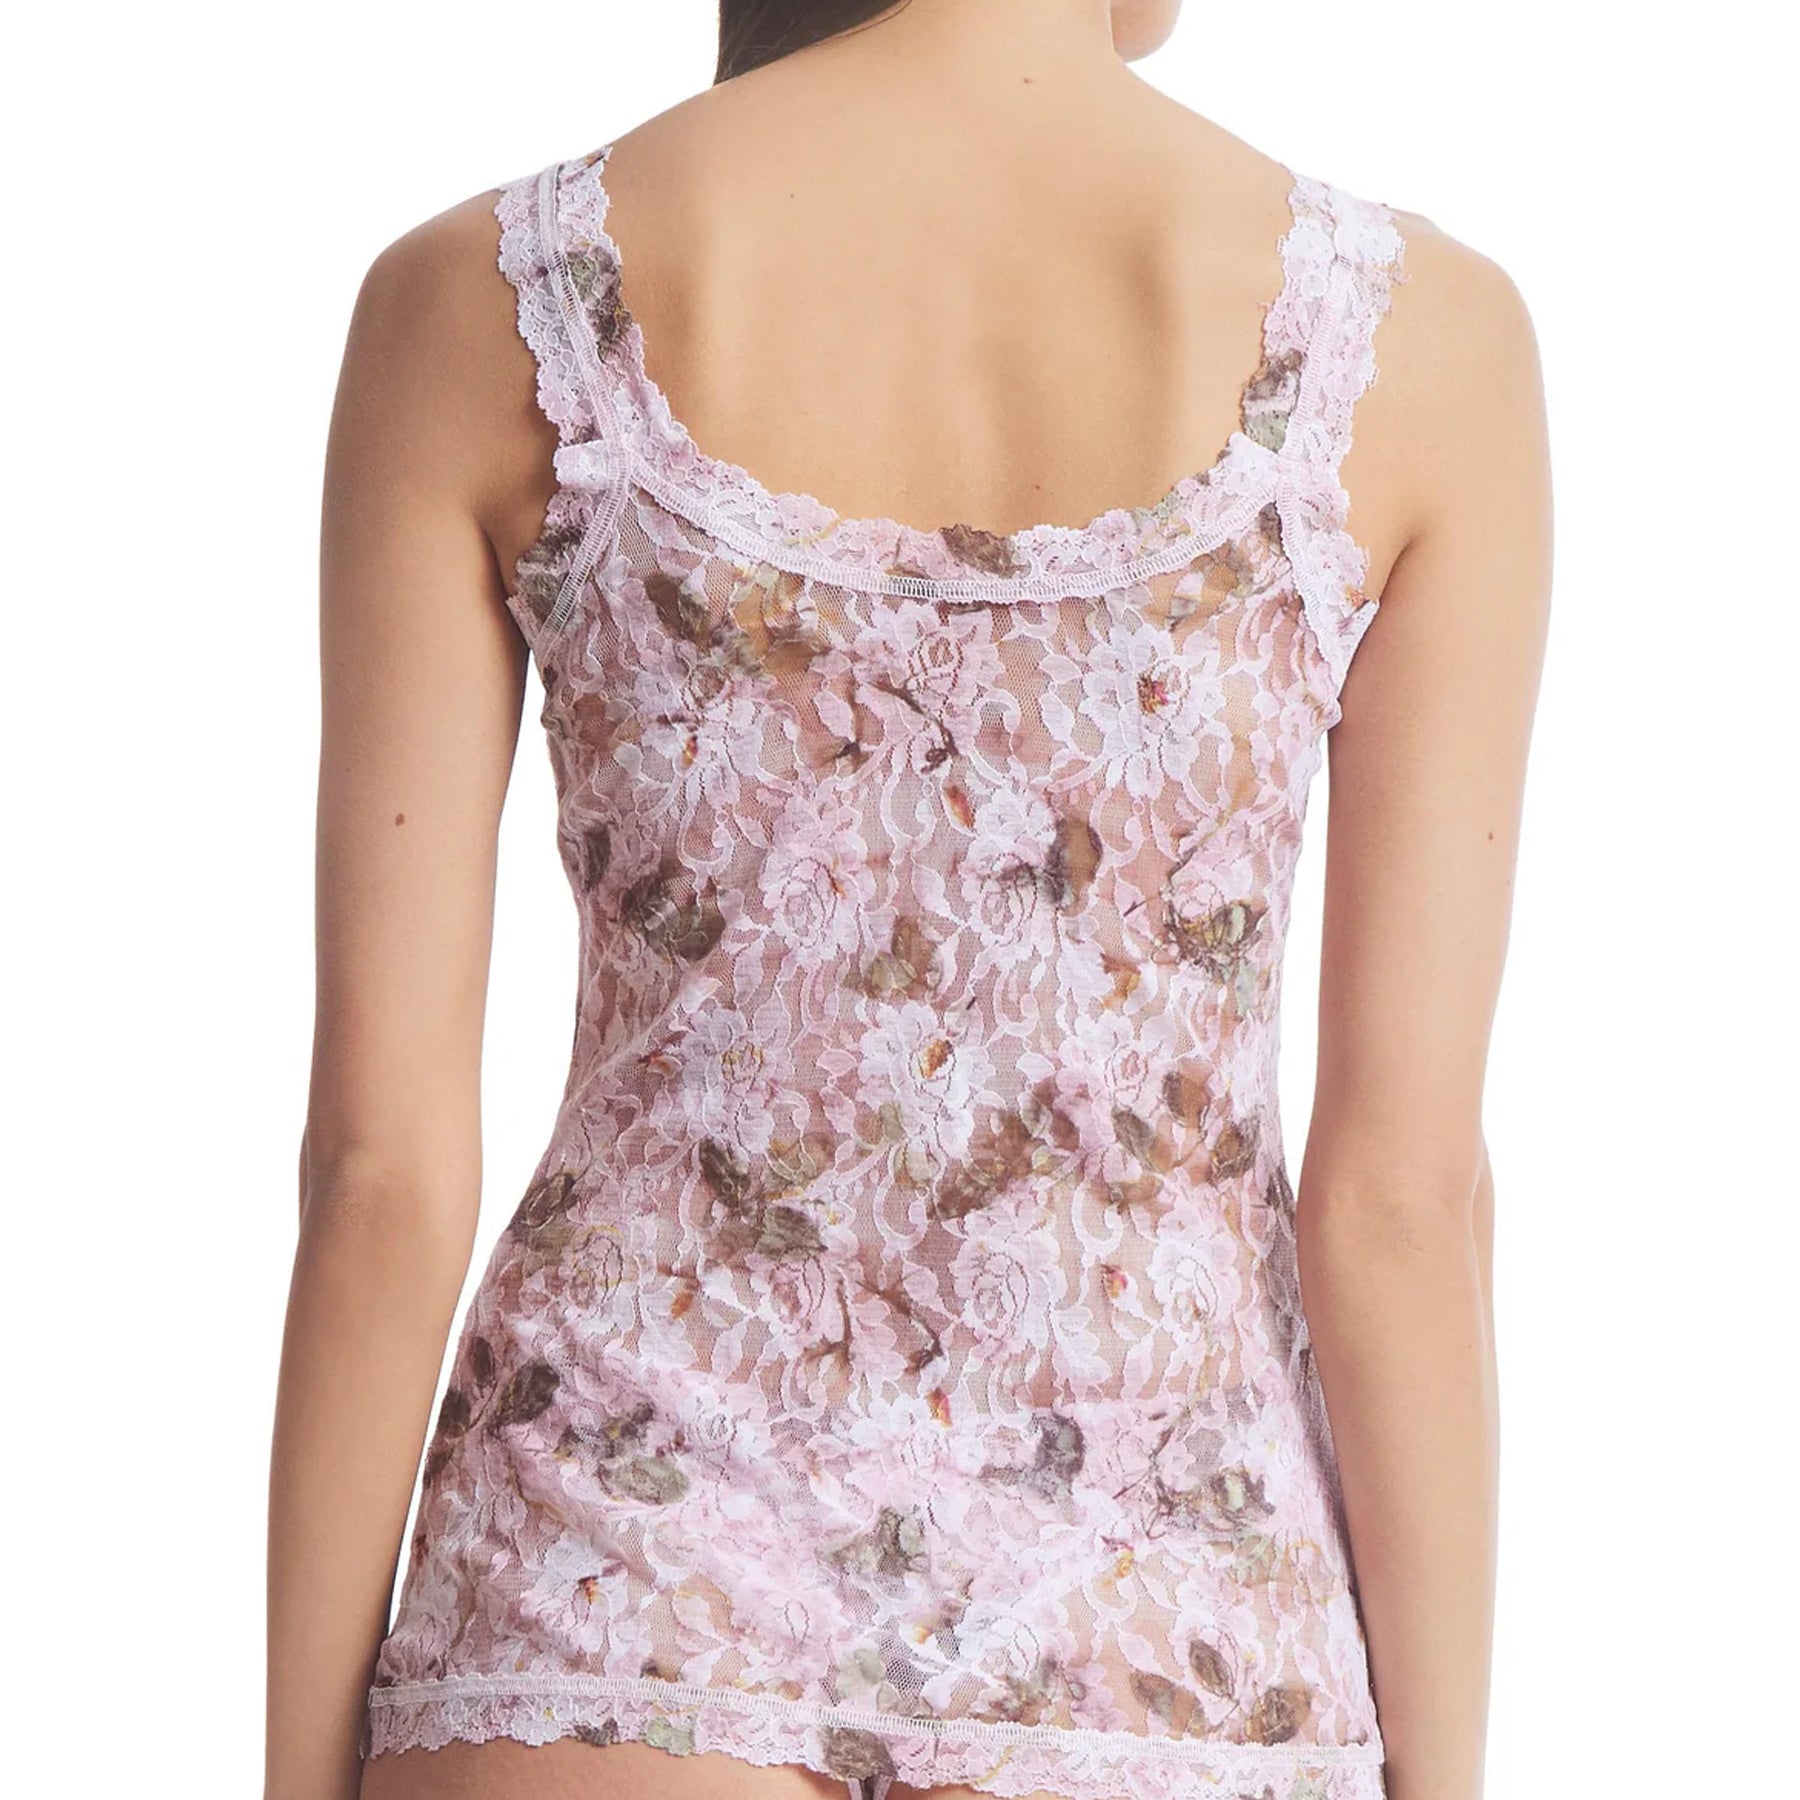 Hanky Panky Signature Printed Lace Camisole